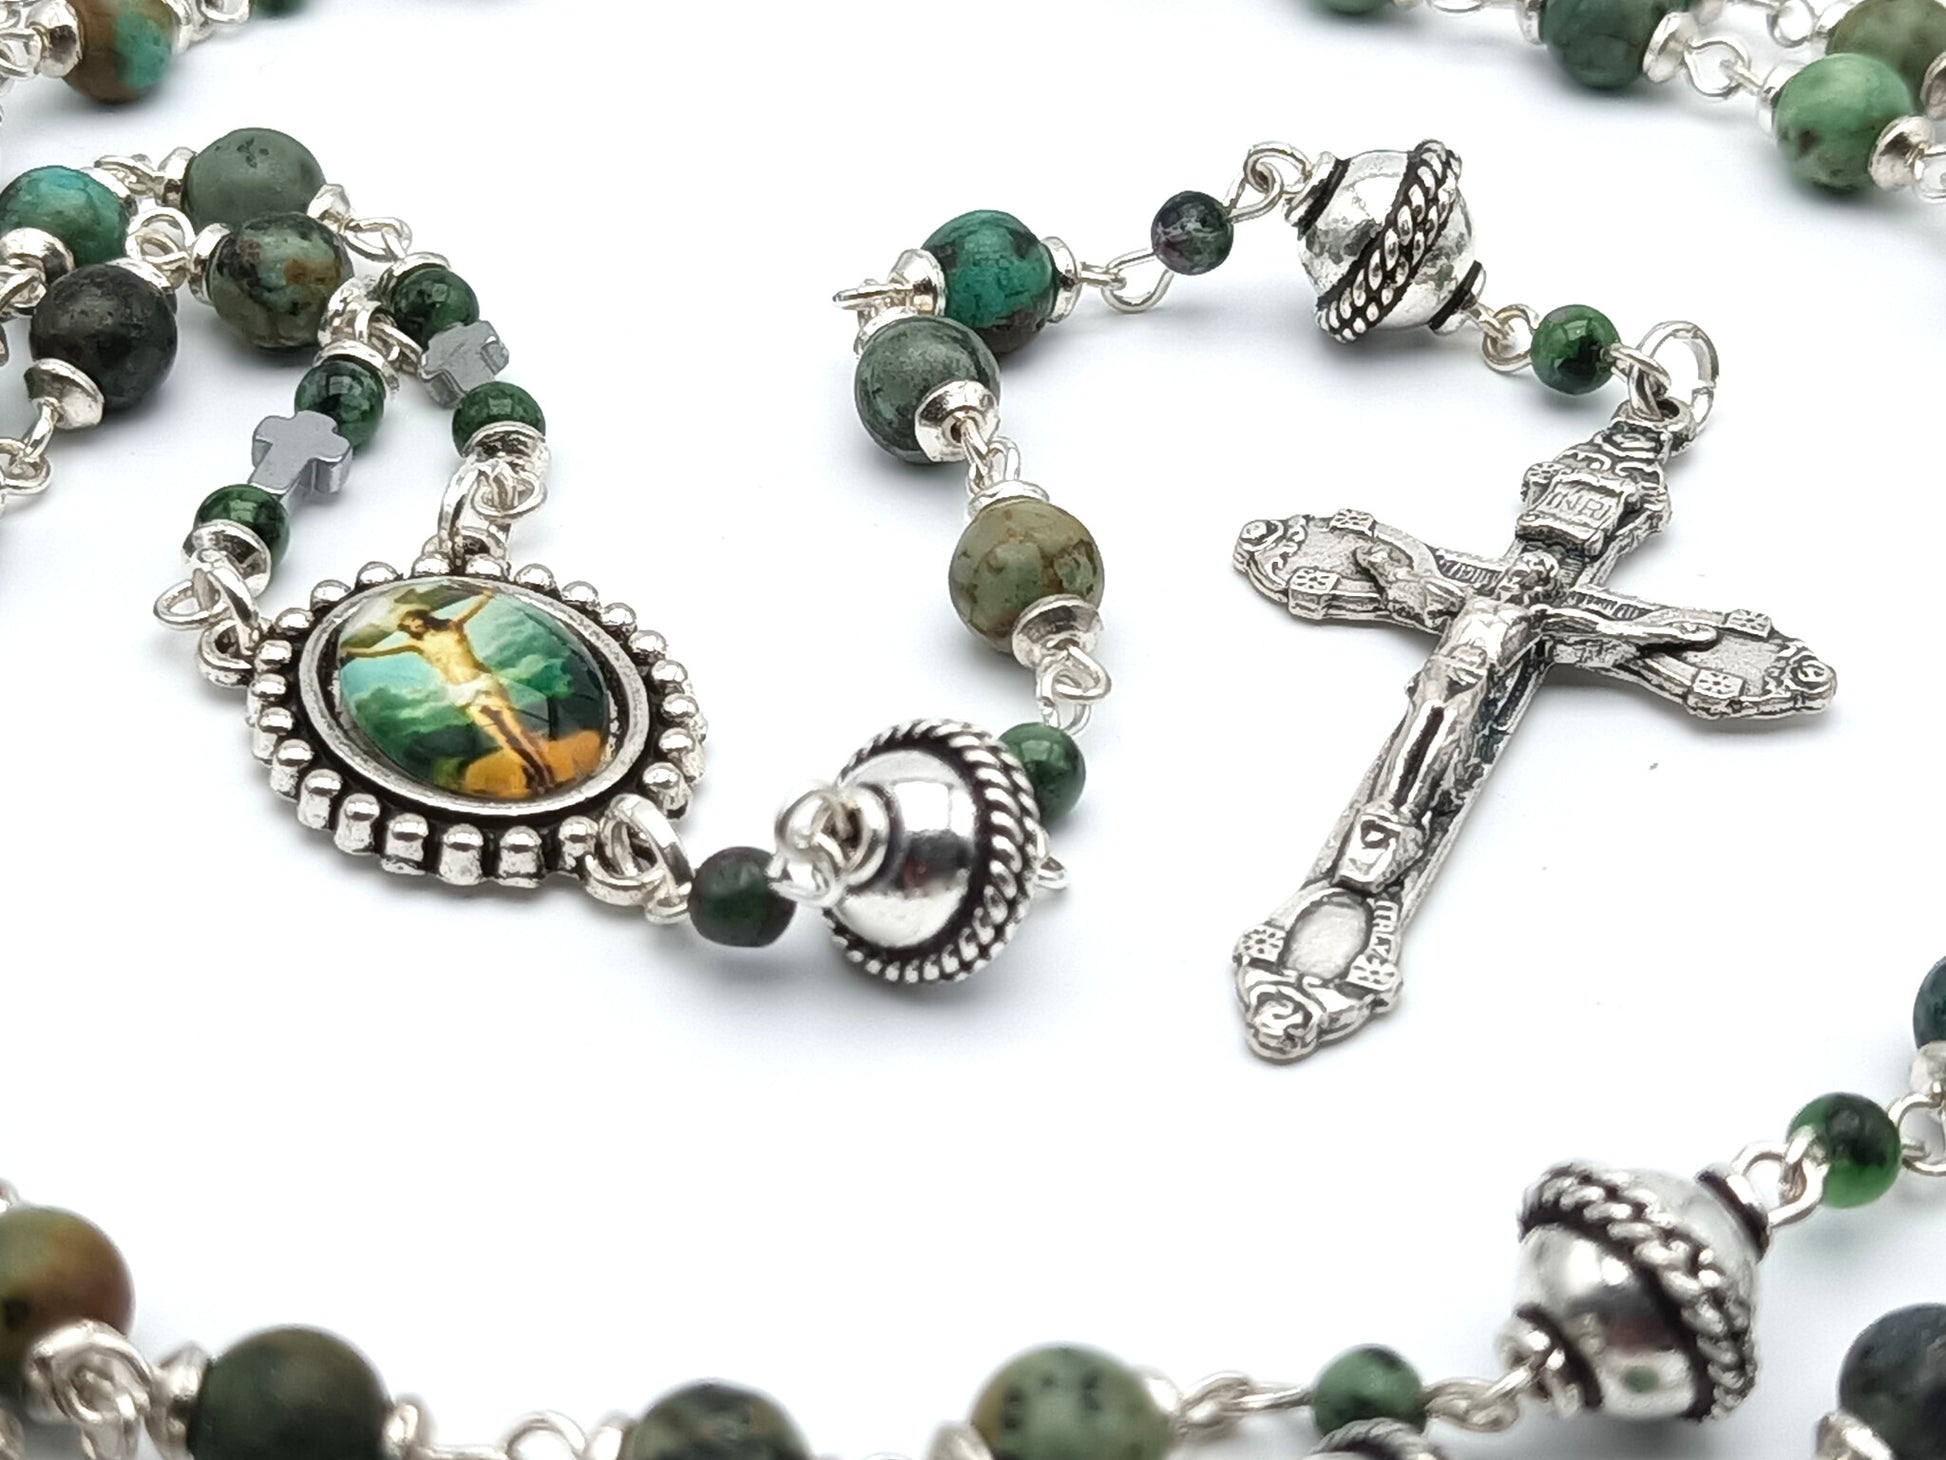 The Crucifixion unique rosary beads with green gemstone beads, silver crucifix, pater beads and picture centre medal.